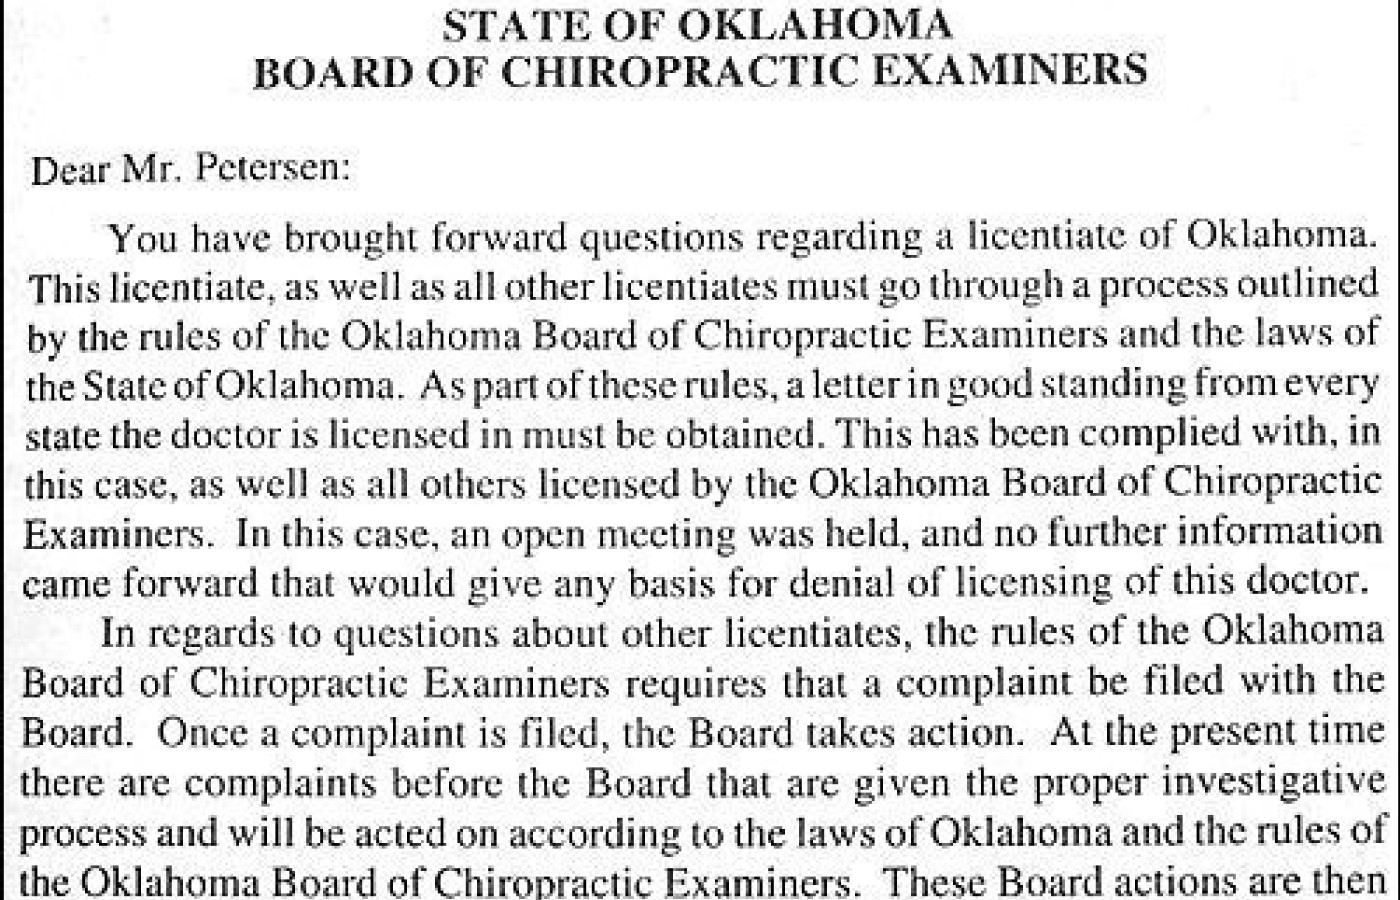 Letter from Oklahoma State Board of Chiropractic Examiners